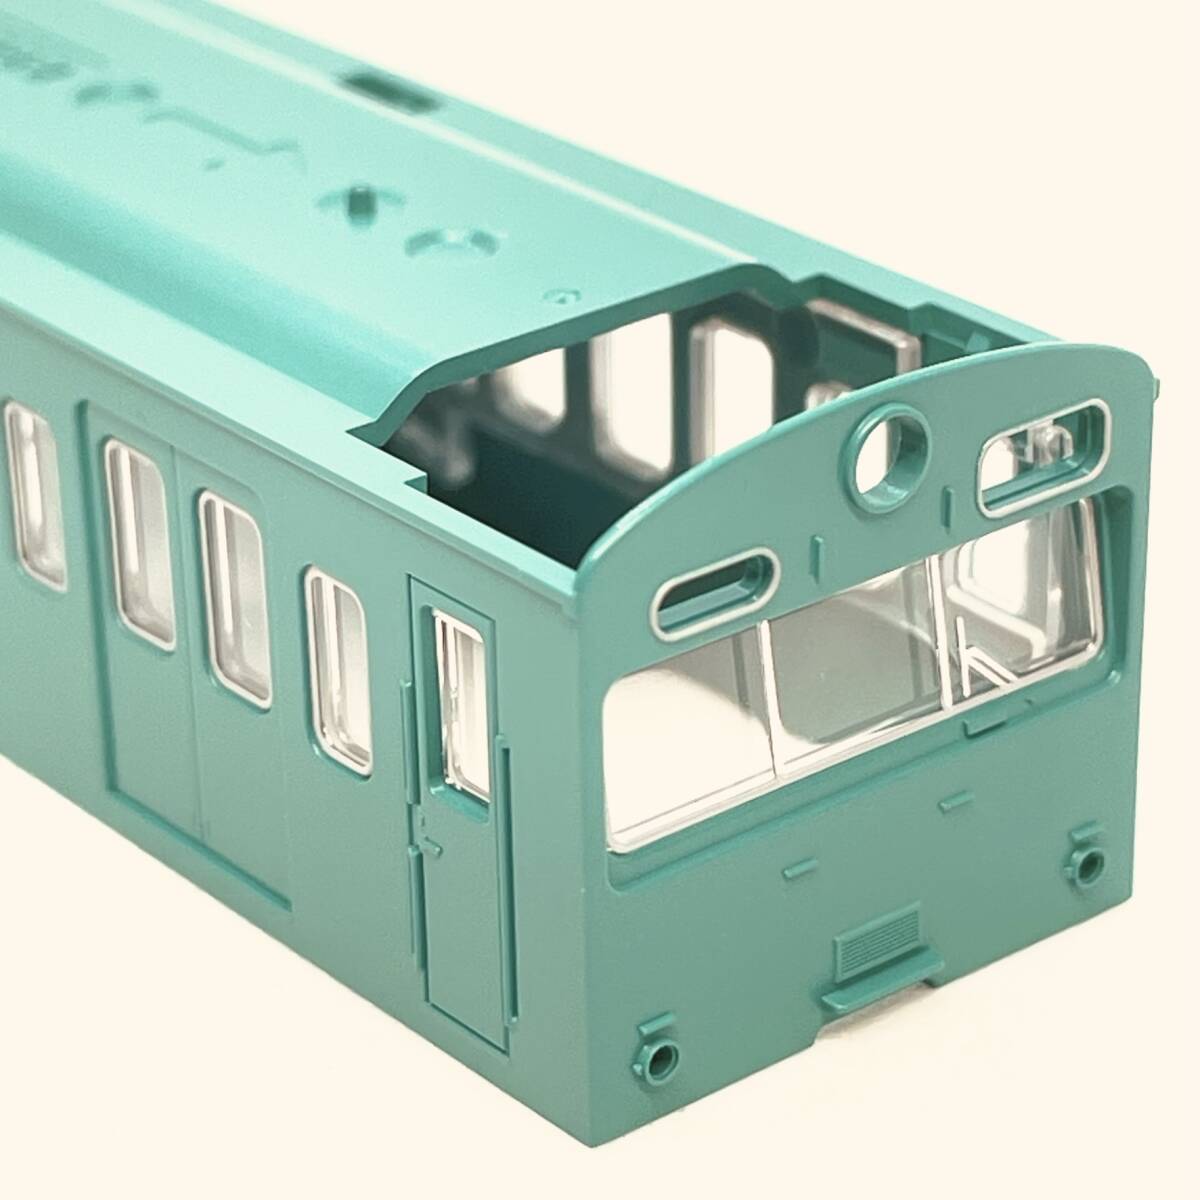 TOMIXk is 103-500 initial model non cooling car emerald green color body + glass 1 both minute entering 98534 National Railways 103 series commuting train basic set A from rose si